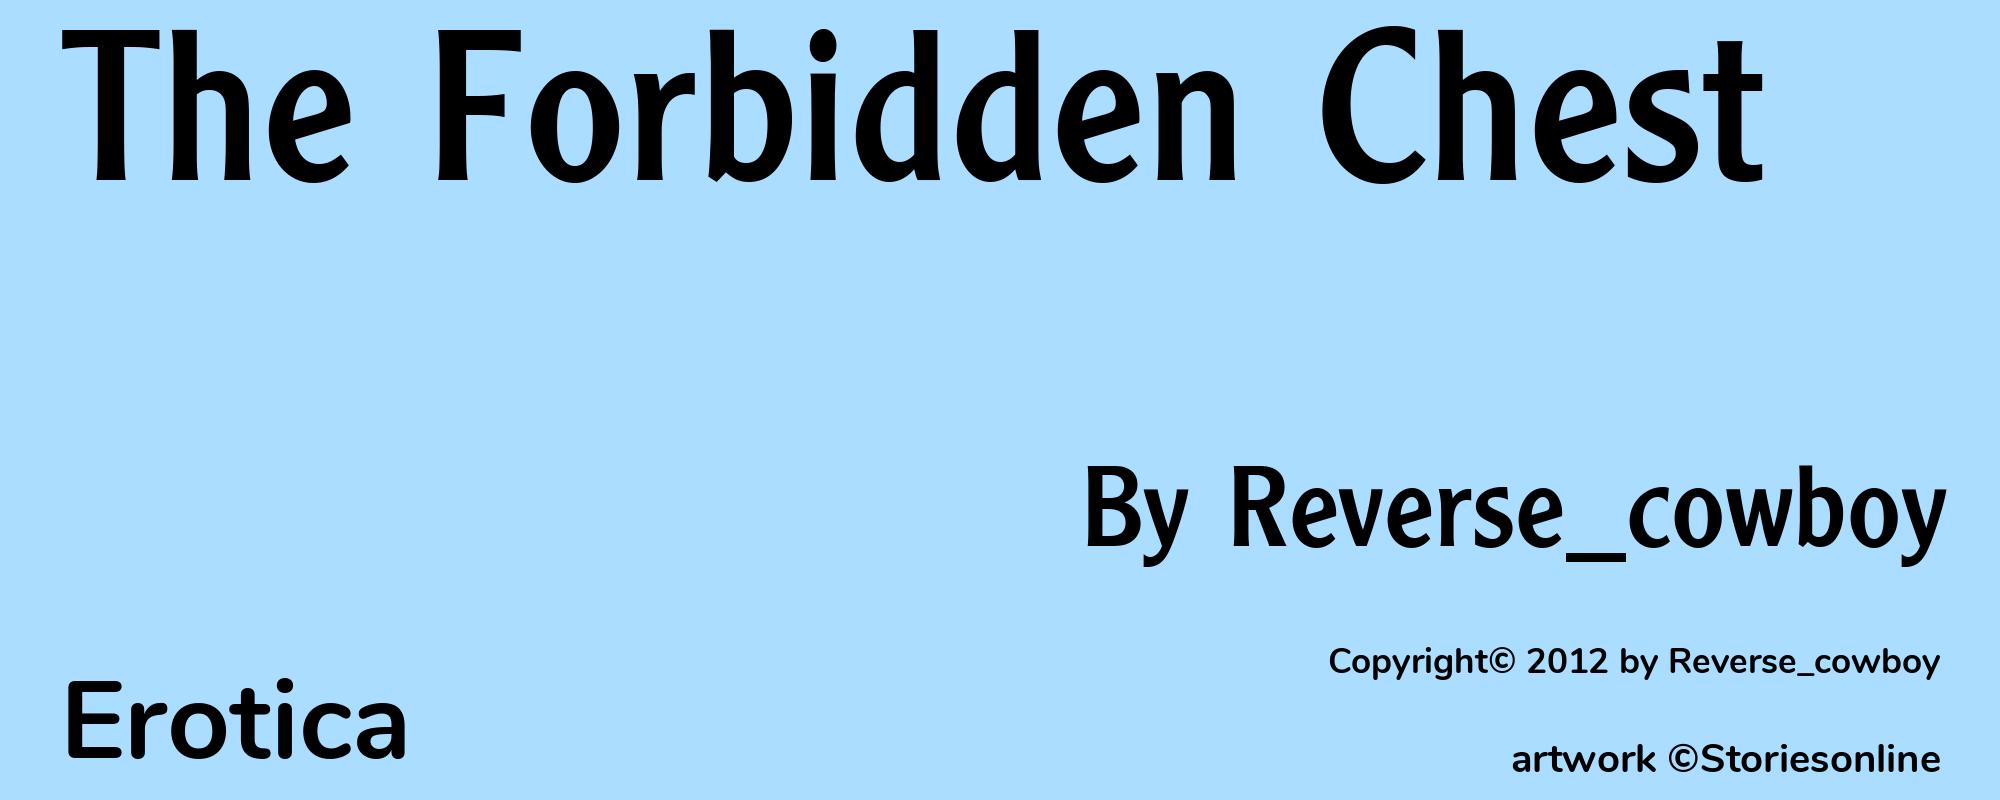 The Forbidden Chest - Cover